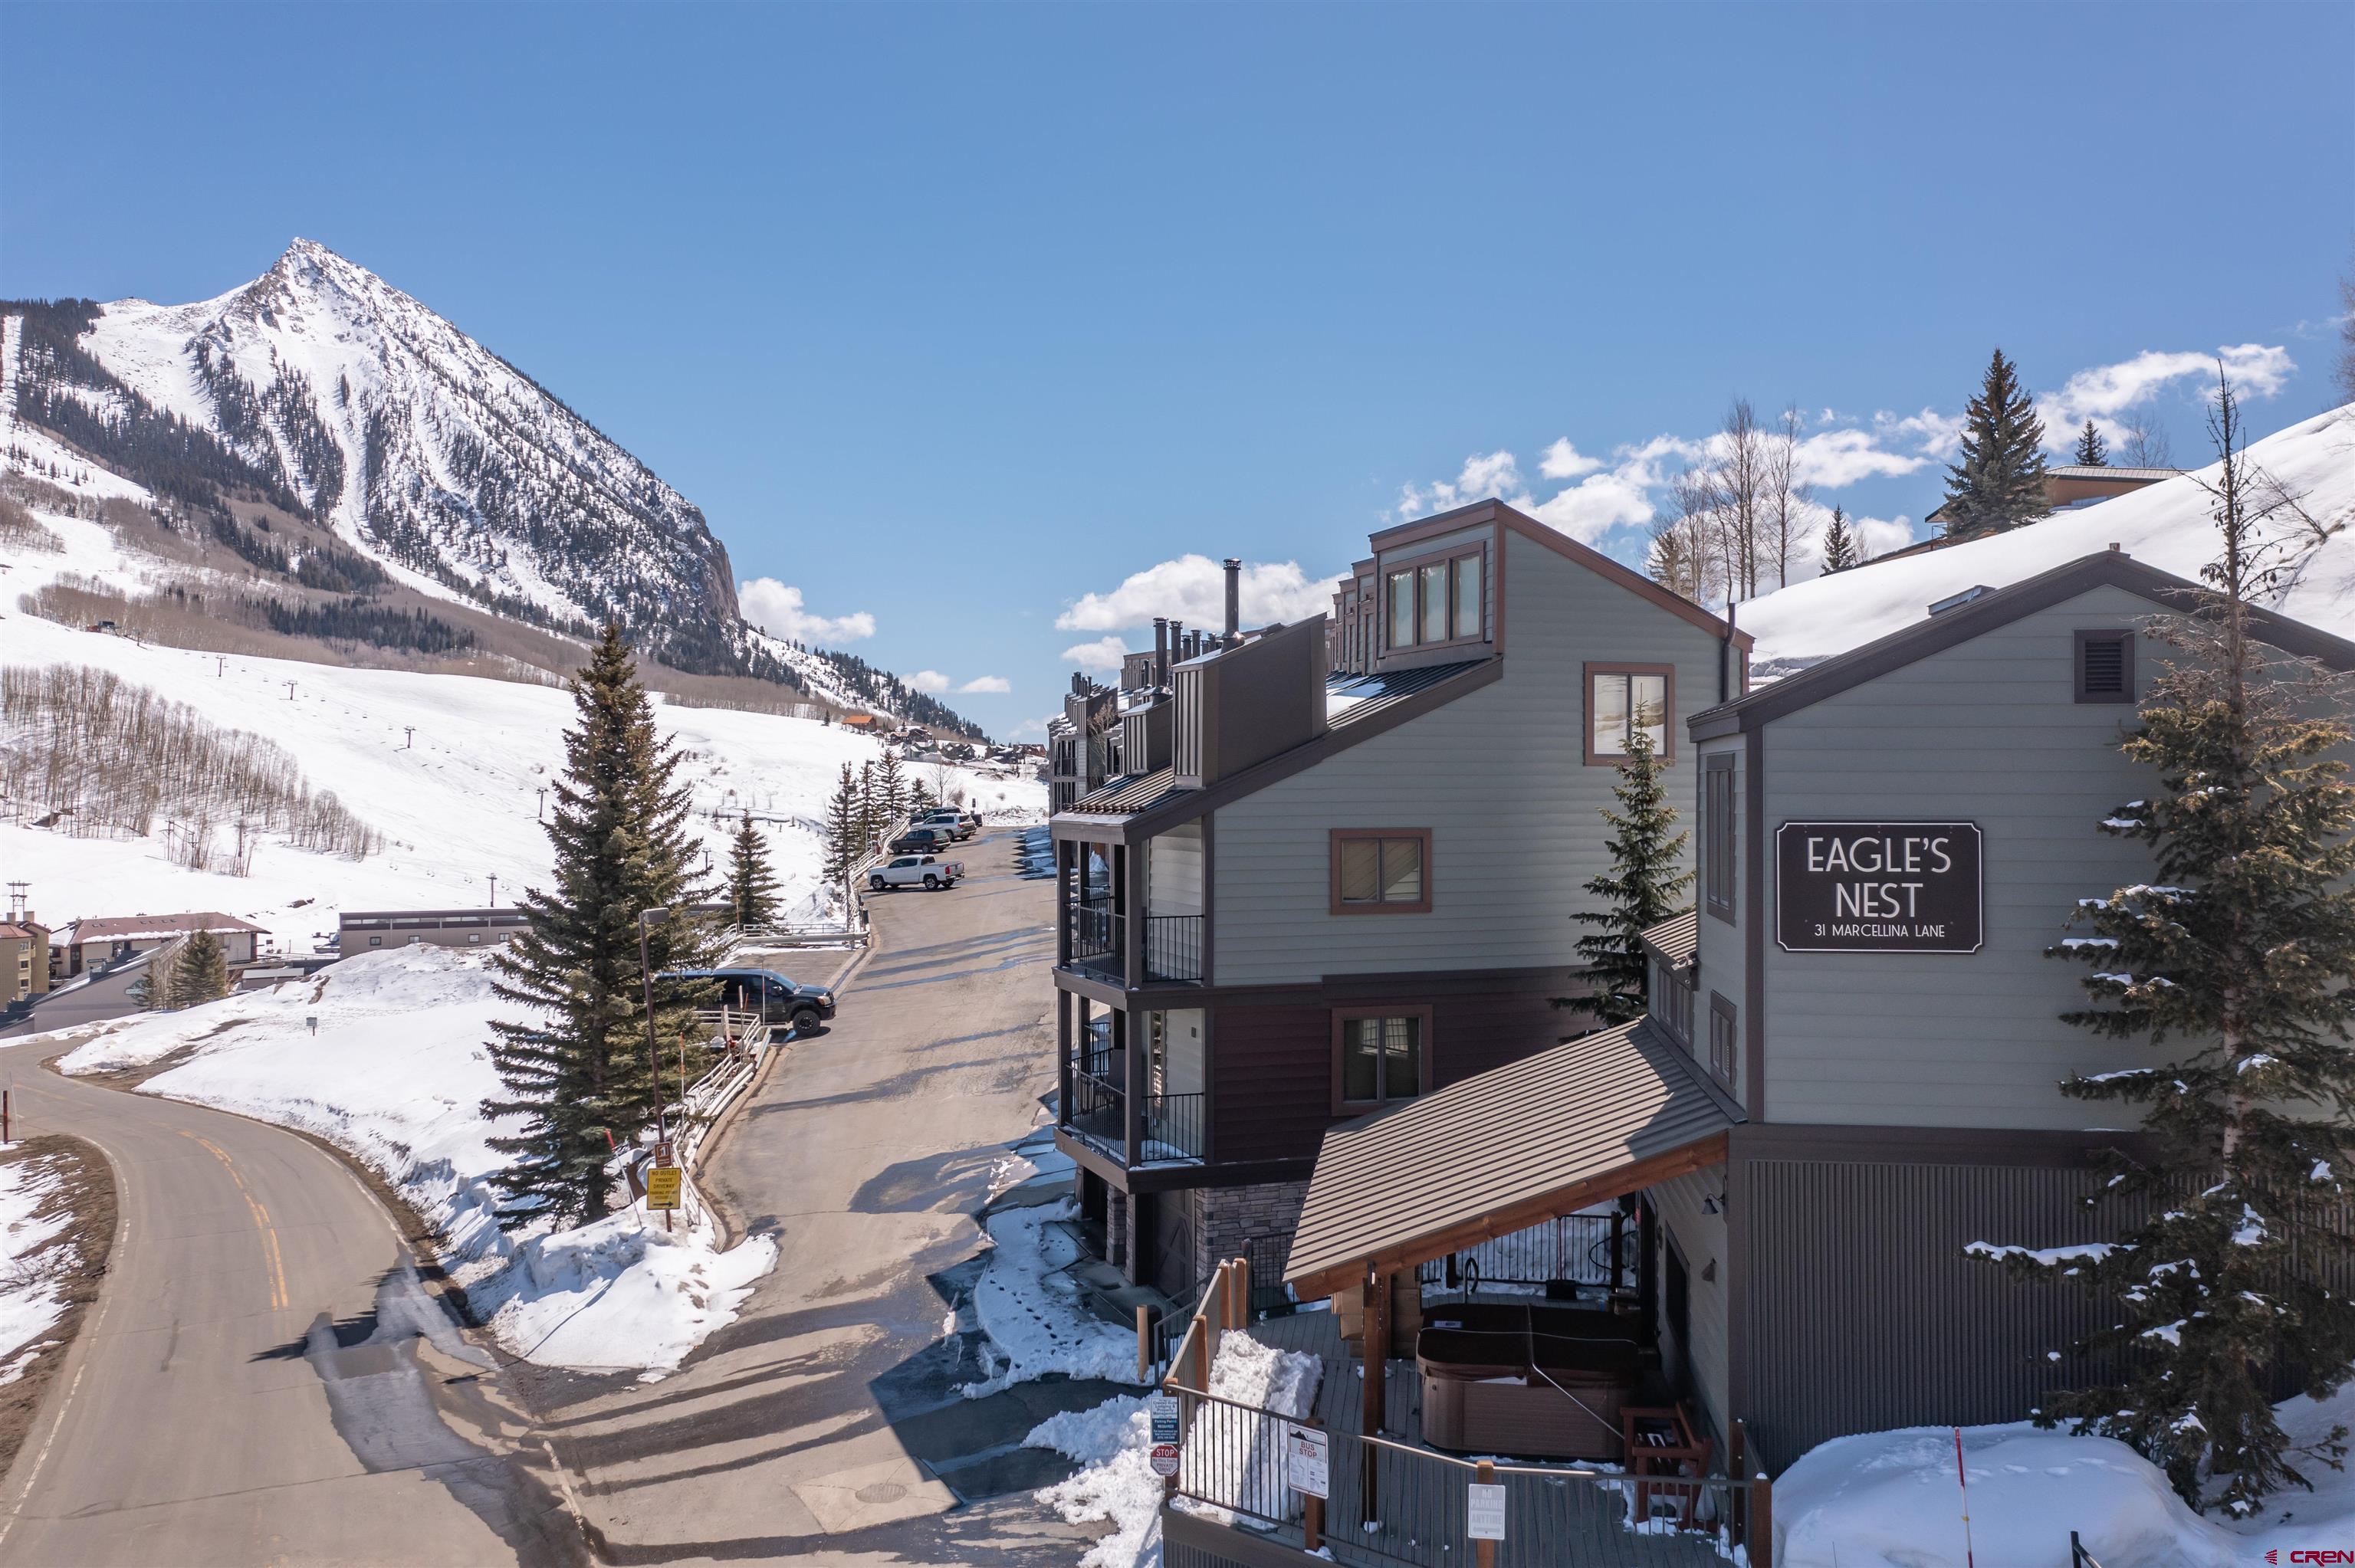 31 Marcellina Lane, #28, Mt. Crested Butte, CO 81225 Listing Photo  1